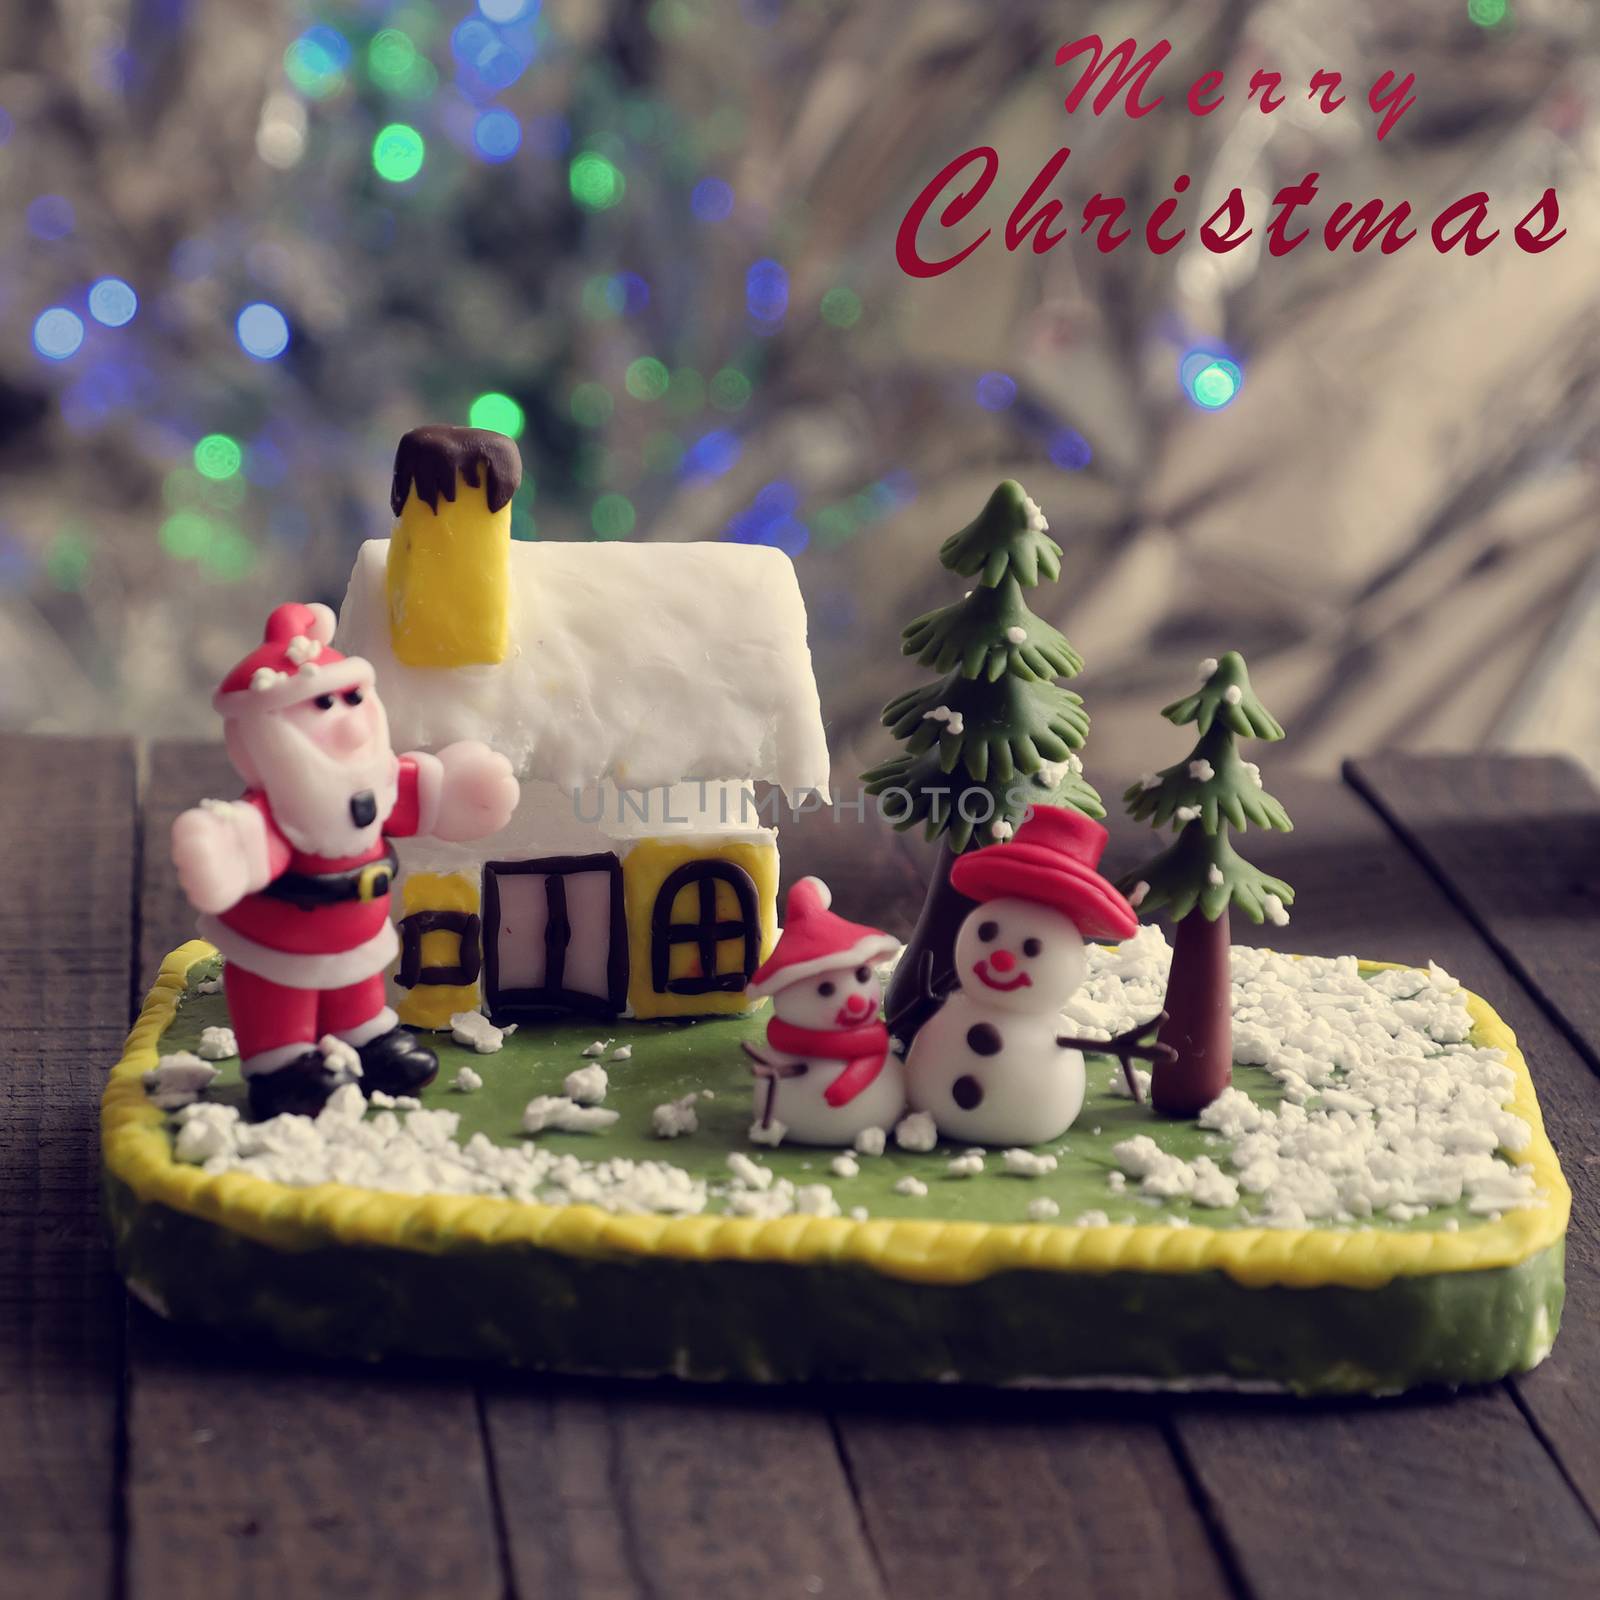 Merry Christmas background and happy new year from abstract handmade art, snowman, owl, bird, christmas tree diy from clay material, wonderful craft to make Xmas ornament for decor in winter holiday